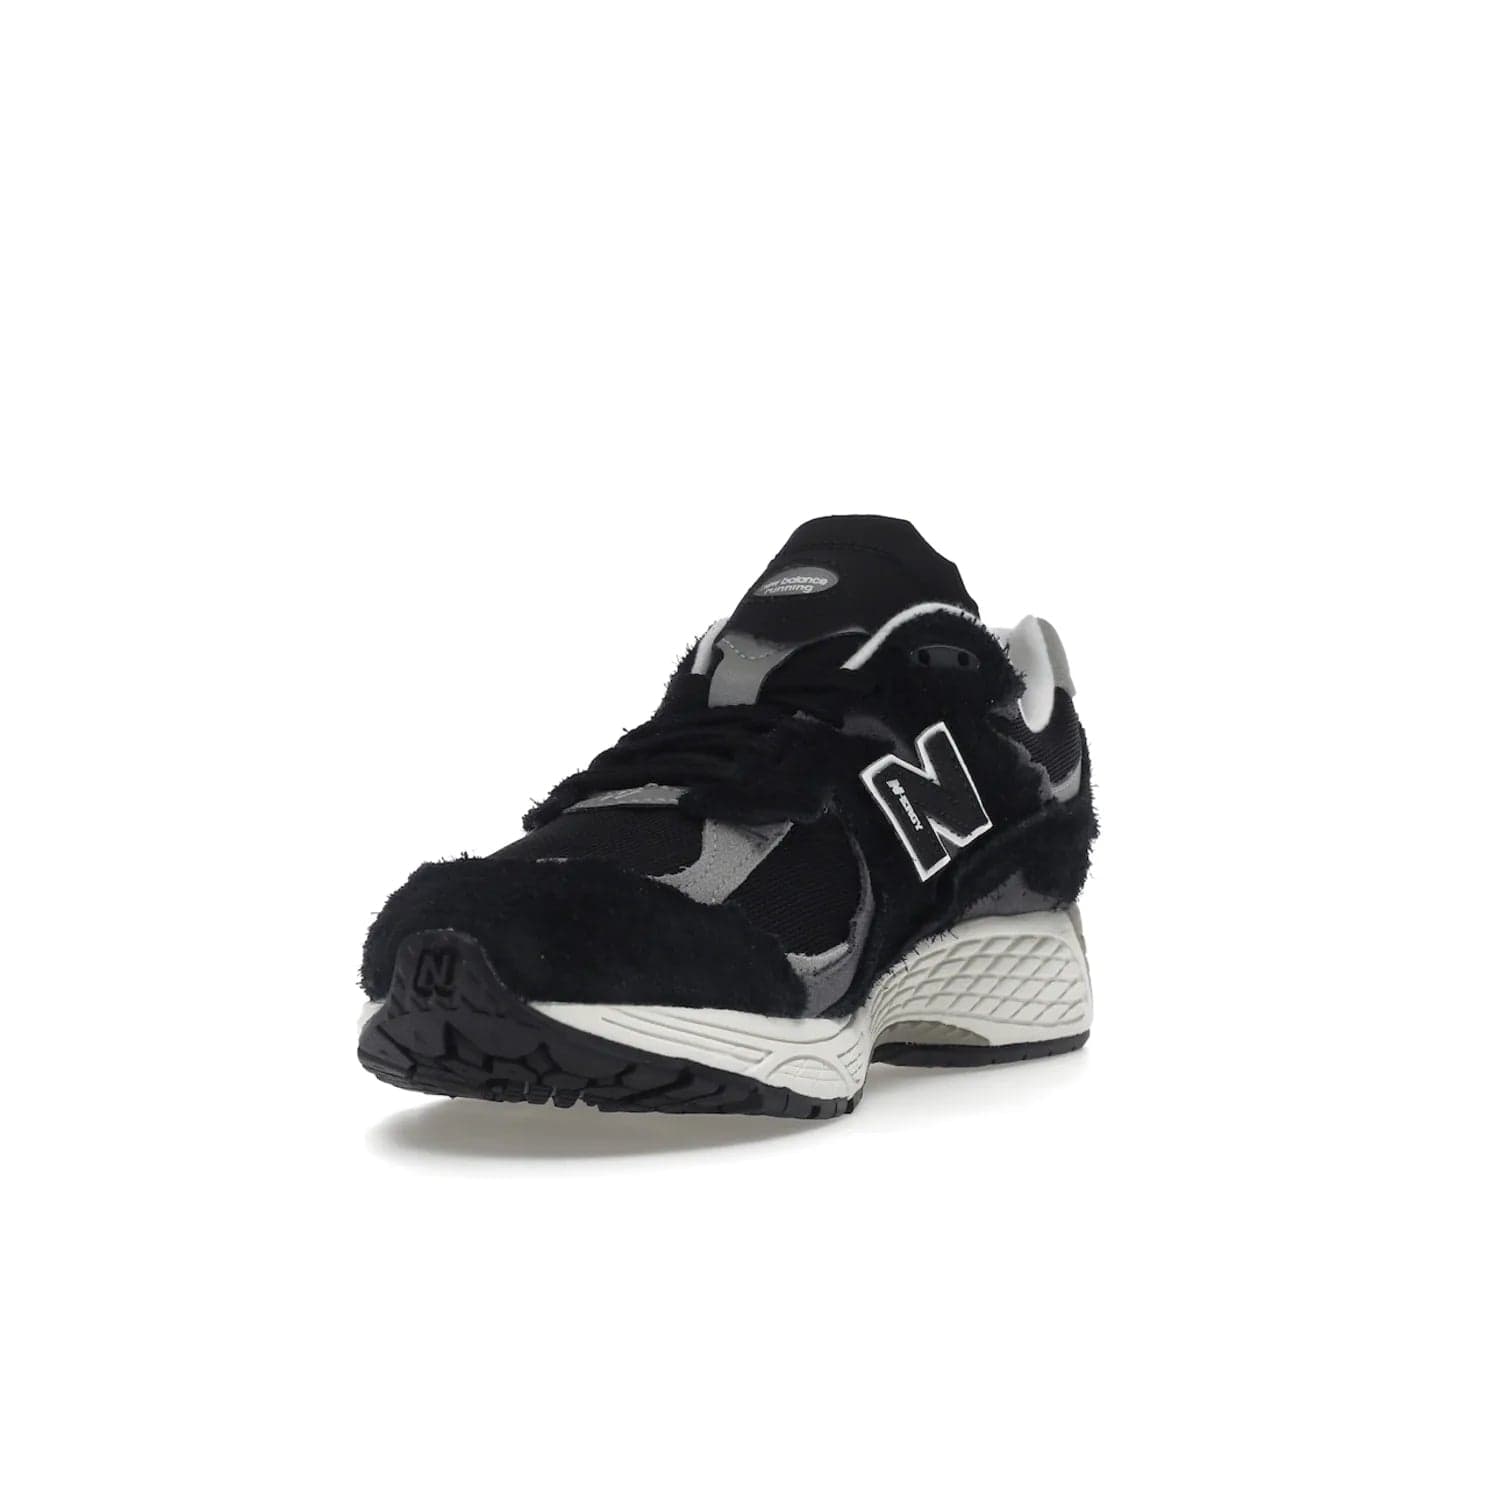 New Balance 2002R Protection Pack Black Grey - Image 13 - Only at www.BallersClubKickz.com - Look stylish in the New Balance 2002R Protection Pack Black Grey. Uppers constructed from premium materials like mesh and synthetic overlays. Iconic "N" emblem appears in white and black. ABZORB midsole for shock absorption and responsiveness. Black outsole for grip and traction. Lacing system offers customized fit and cushioned tongue and collar offer comfort and stability. Step up your style with this must-hav